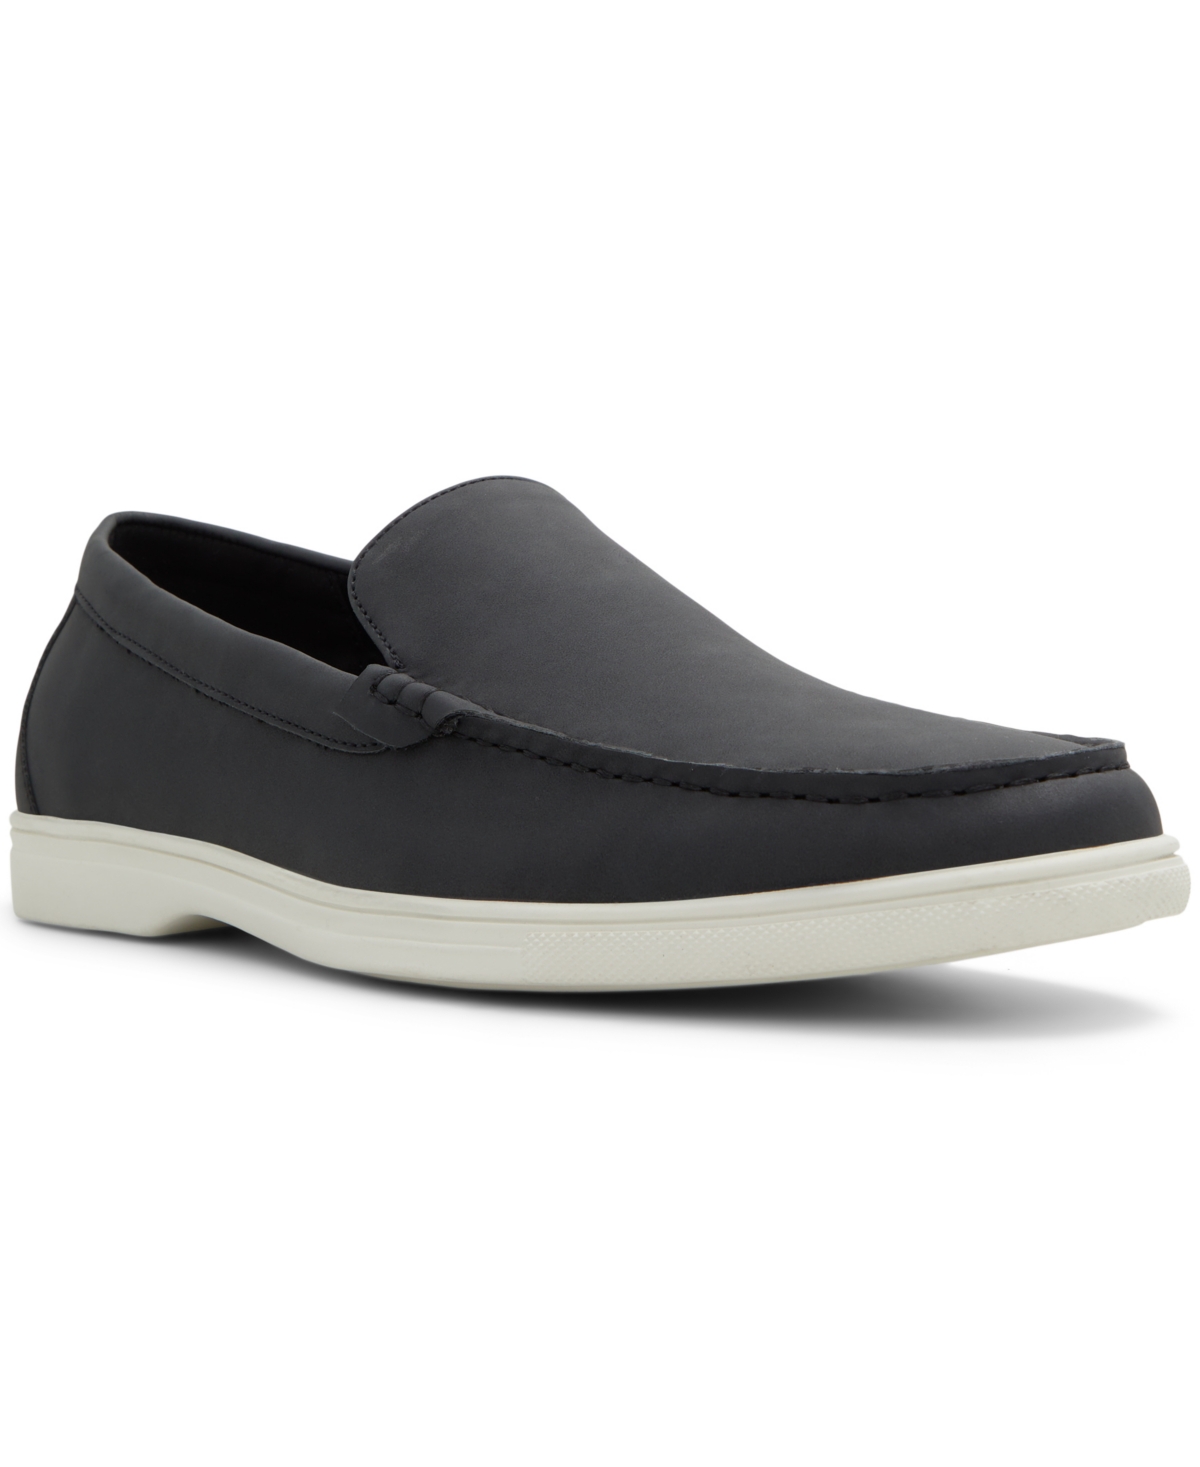 Men's Reilley Casual Loafers - Black